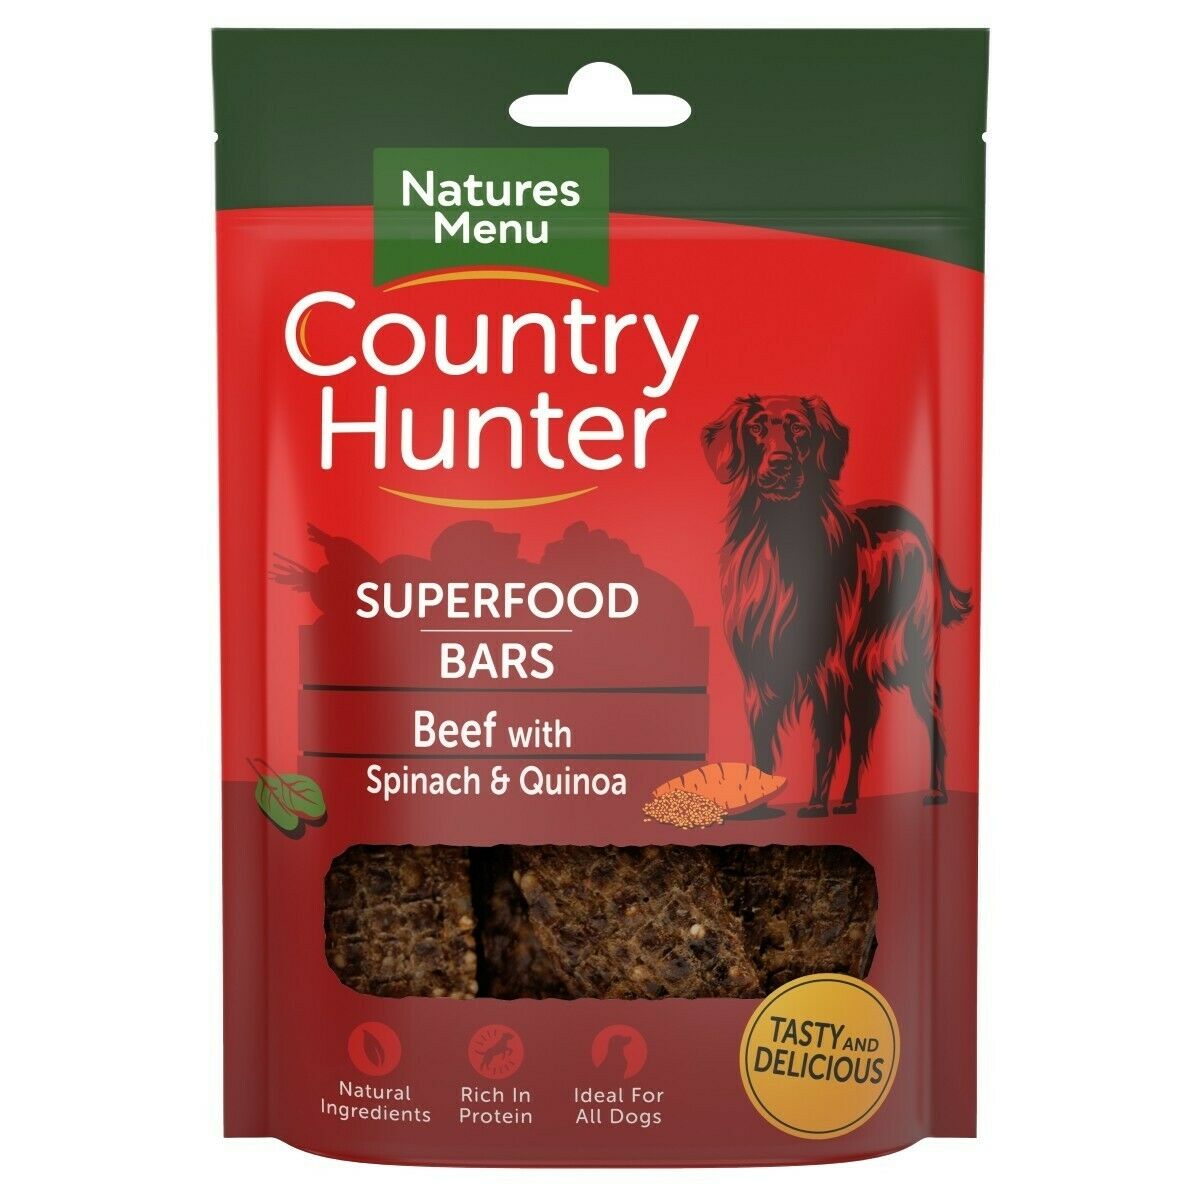 Country Hunter Superfood Bar Beef With Spinach & Quinoa